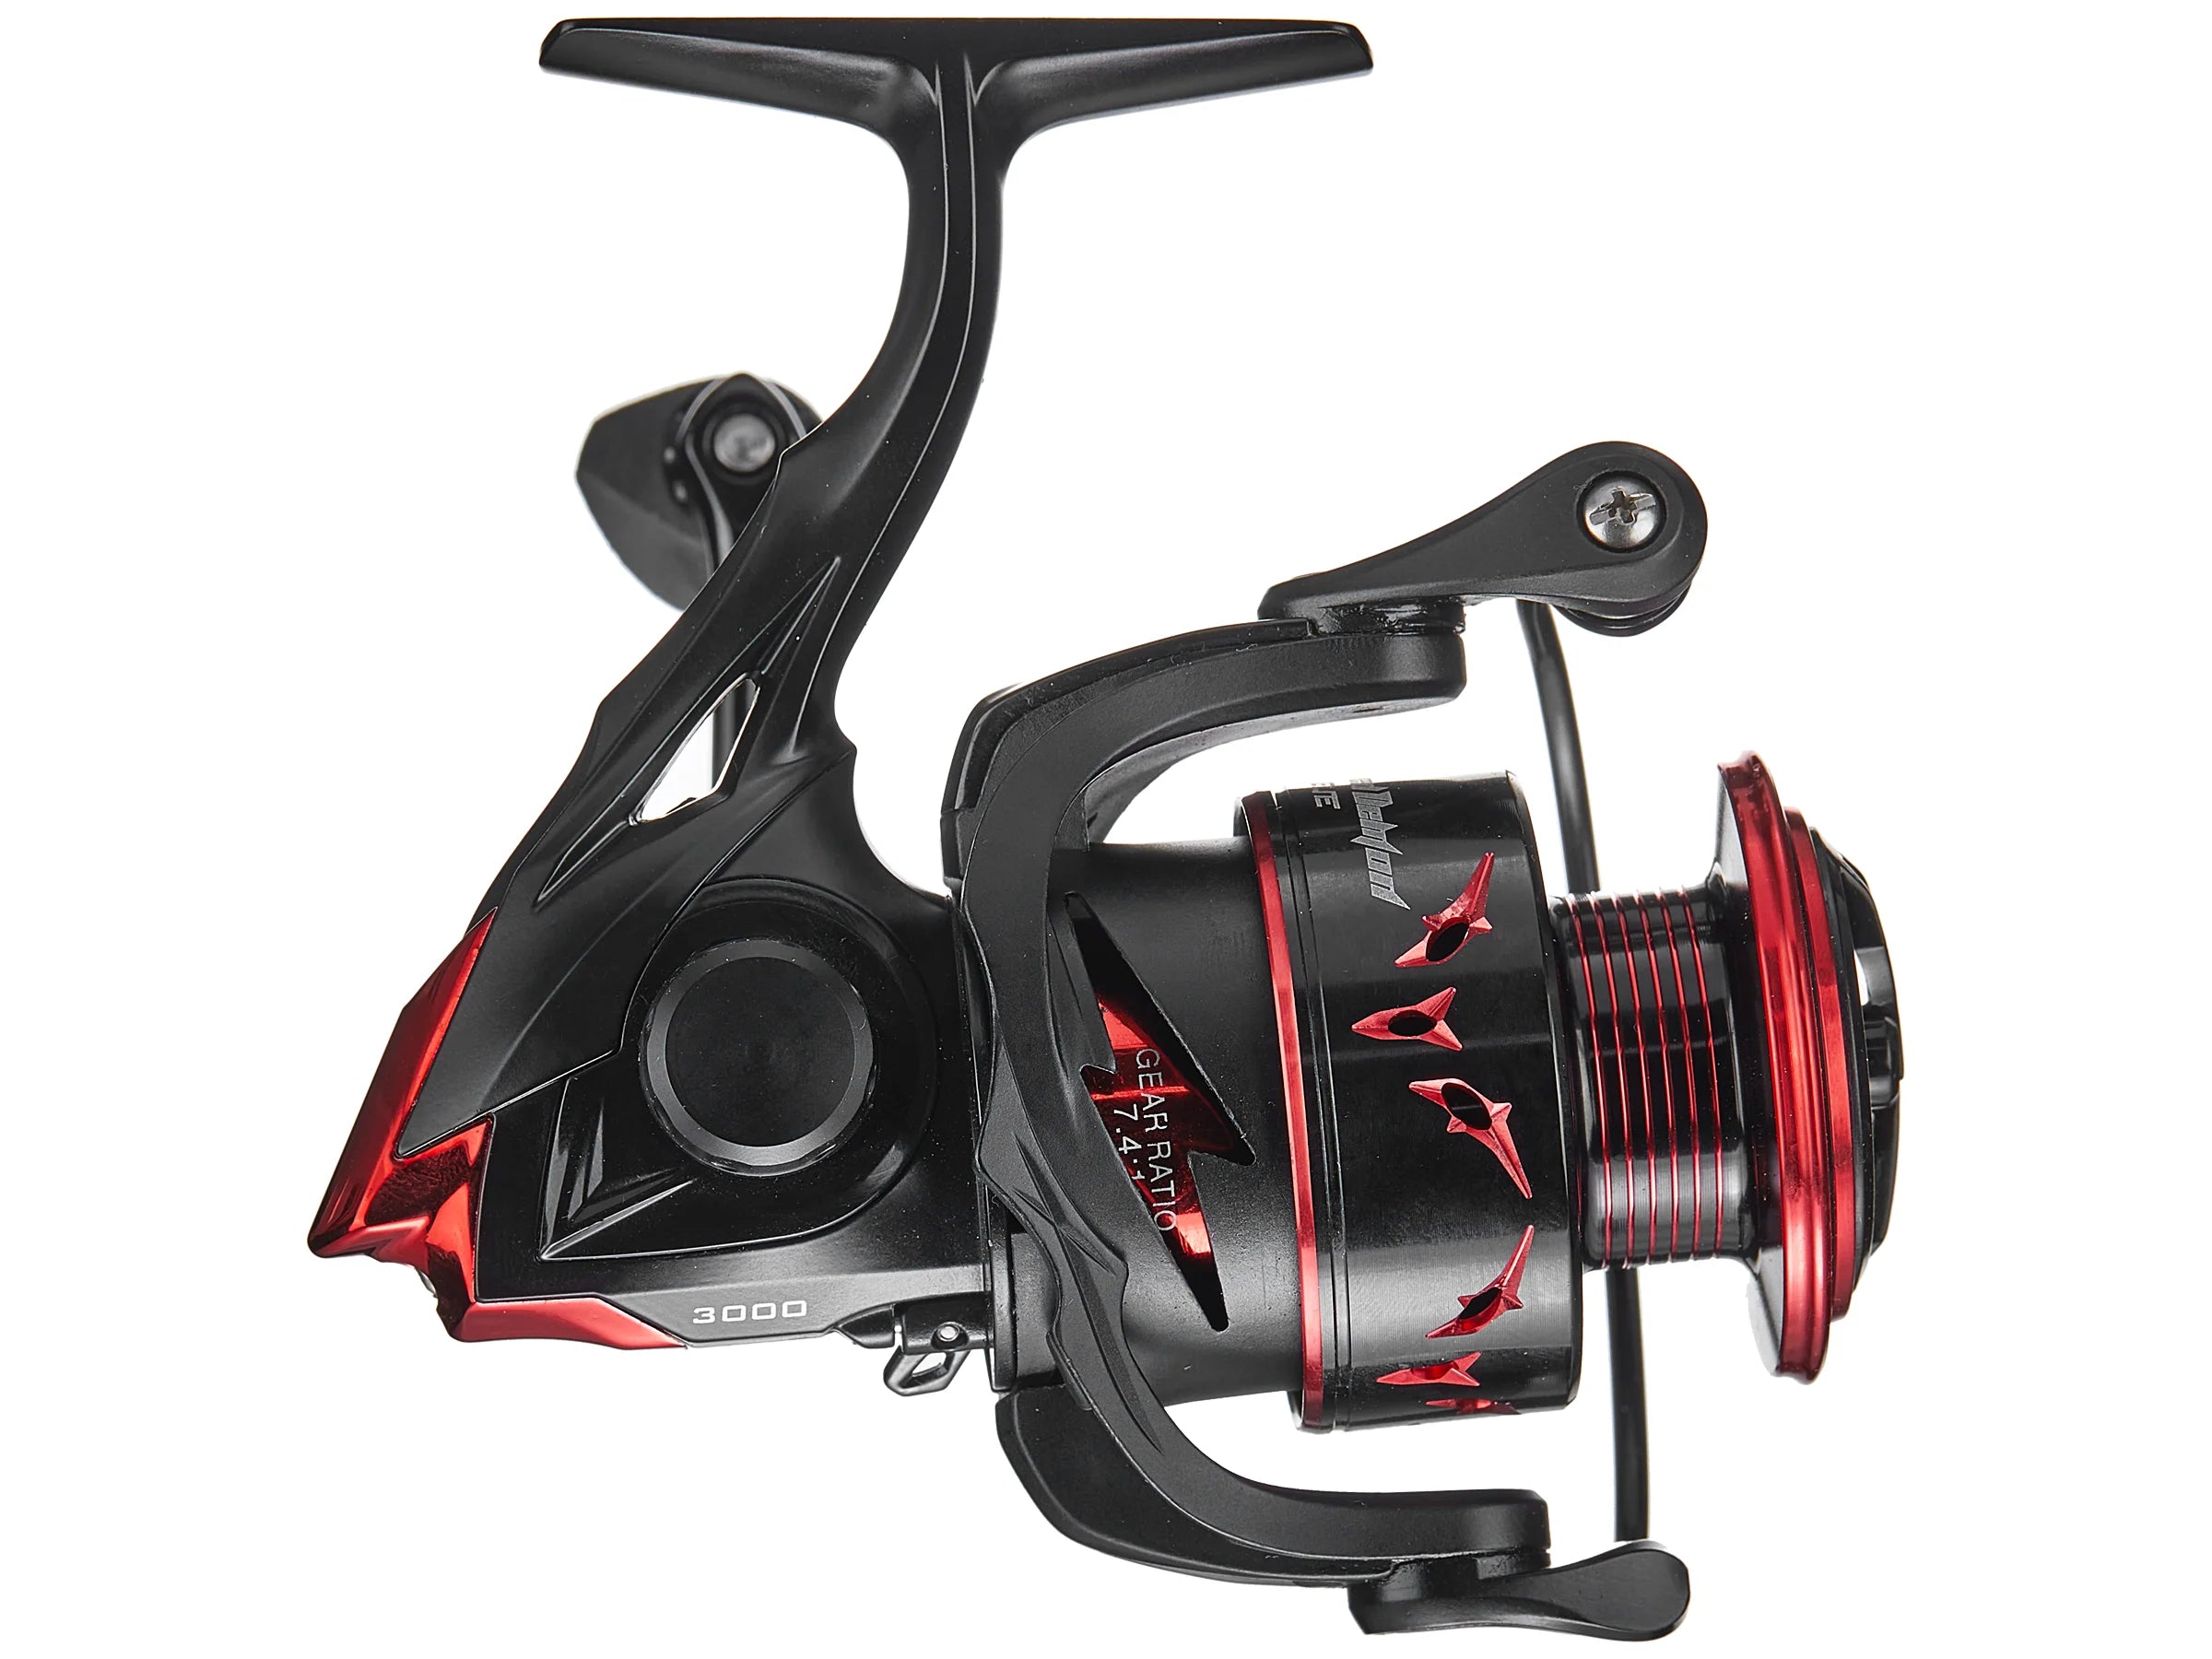 KastKing - 3 Different Zephyr Spinning Reels…what's the